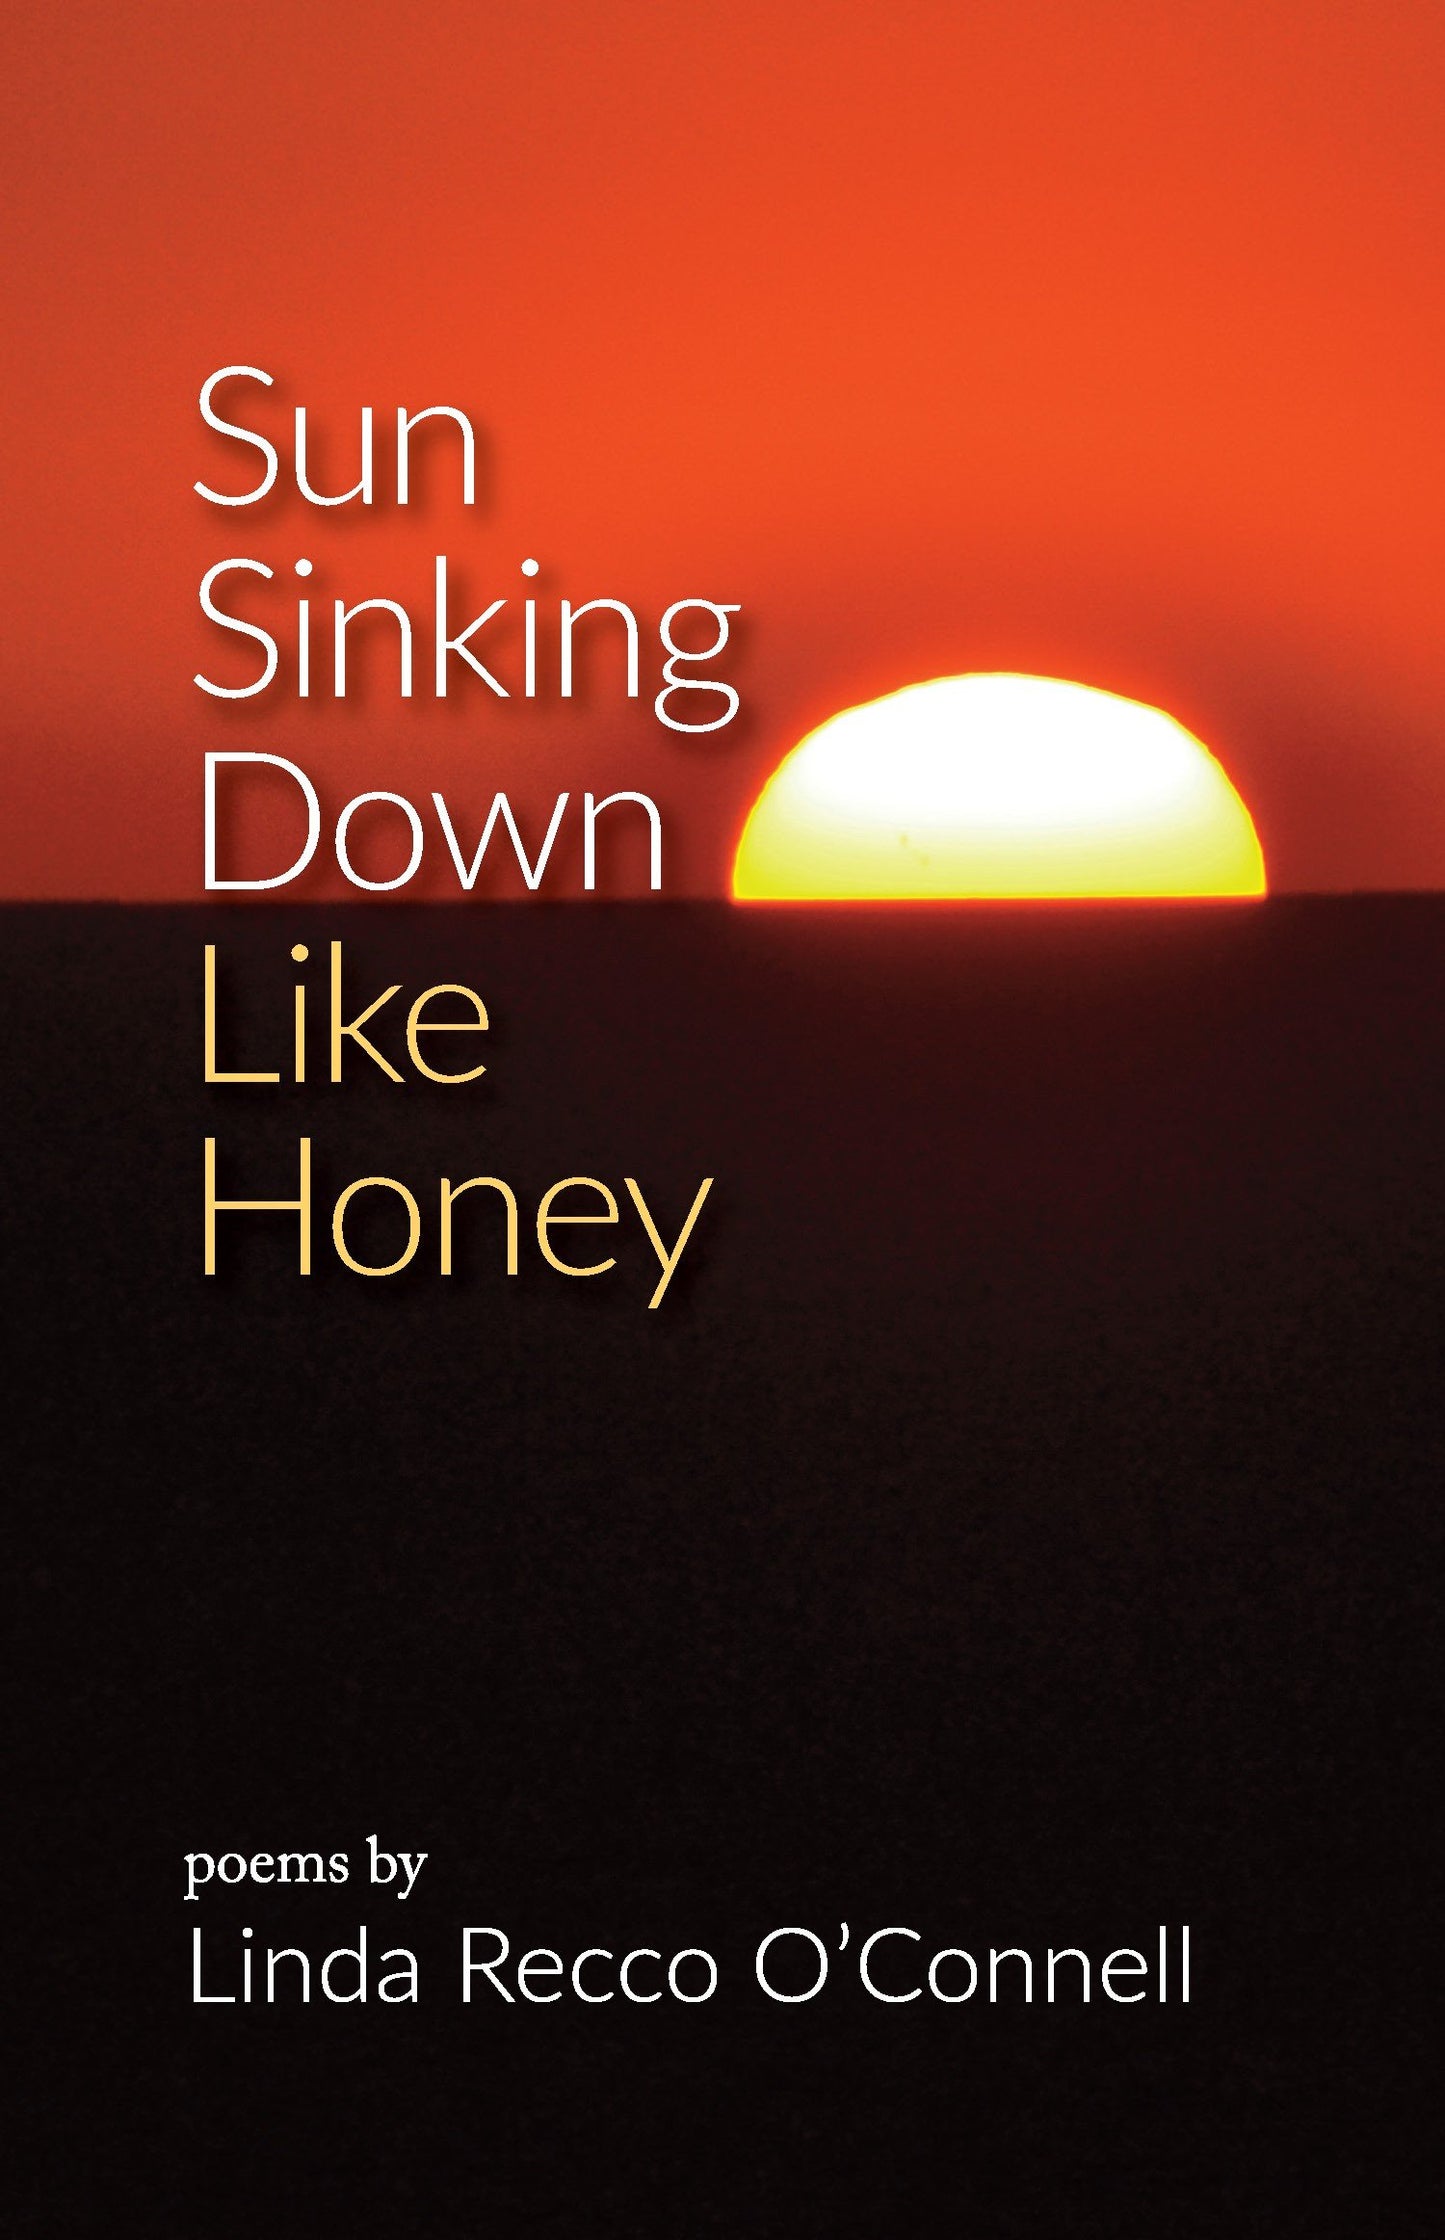 Sun Sinking Down Like Honey: Poems by Linda Recco O’Connell